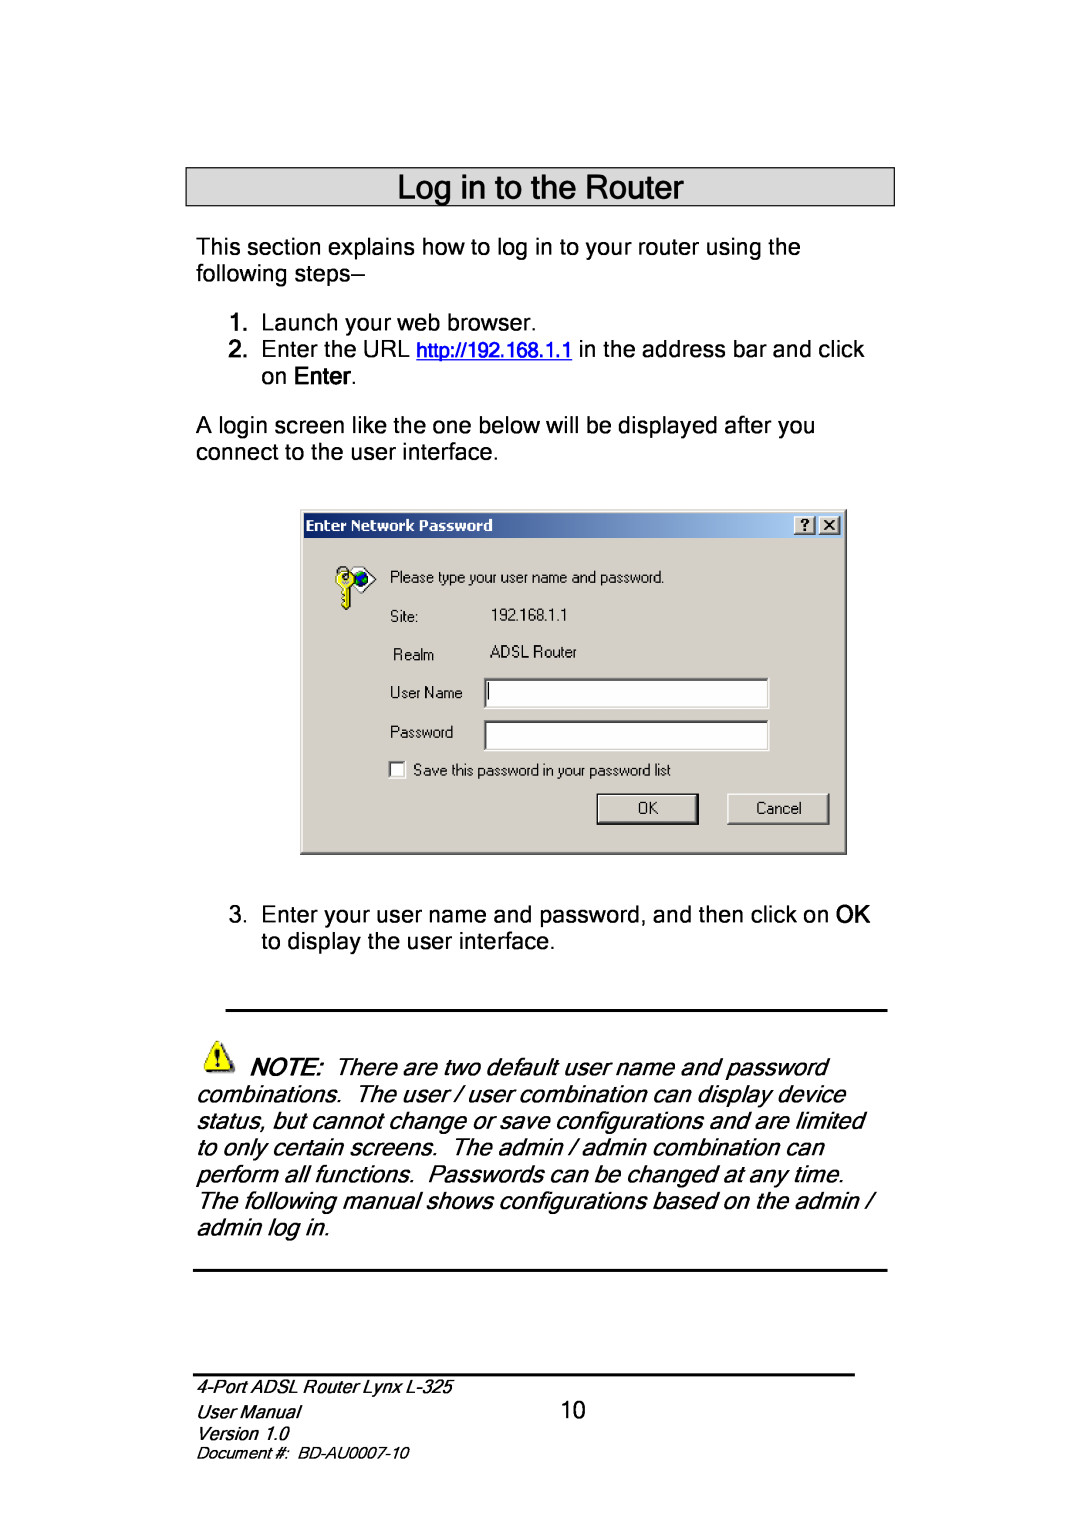 Lynx L-325 user manual Log in to the Router 